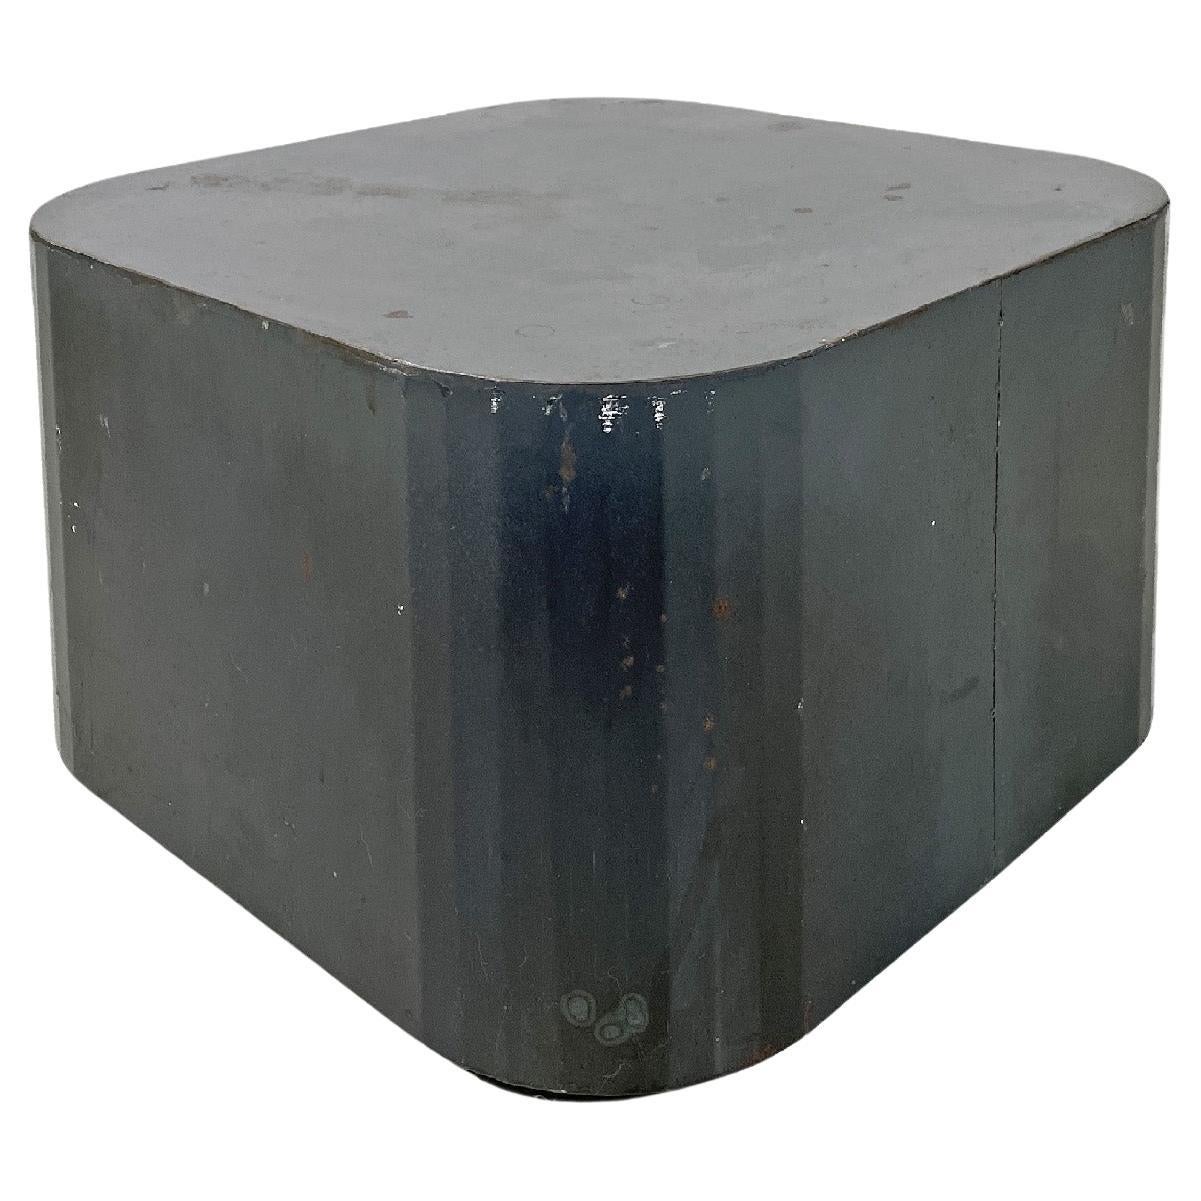 Italian post-modern squared coffee table or pedestal in burnished steel, 2000s